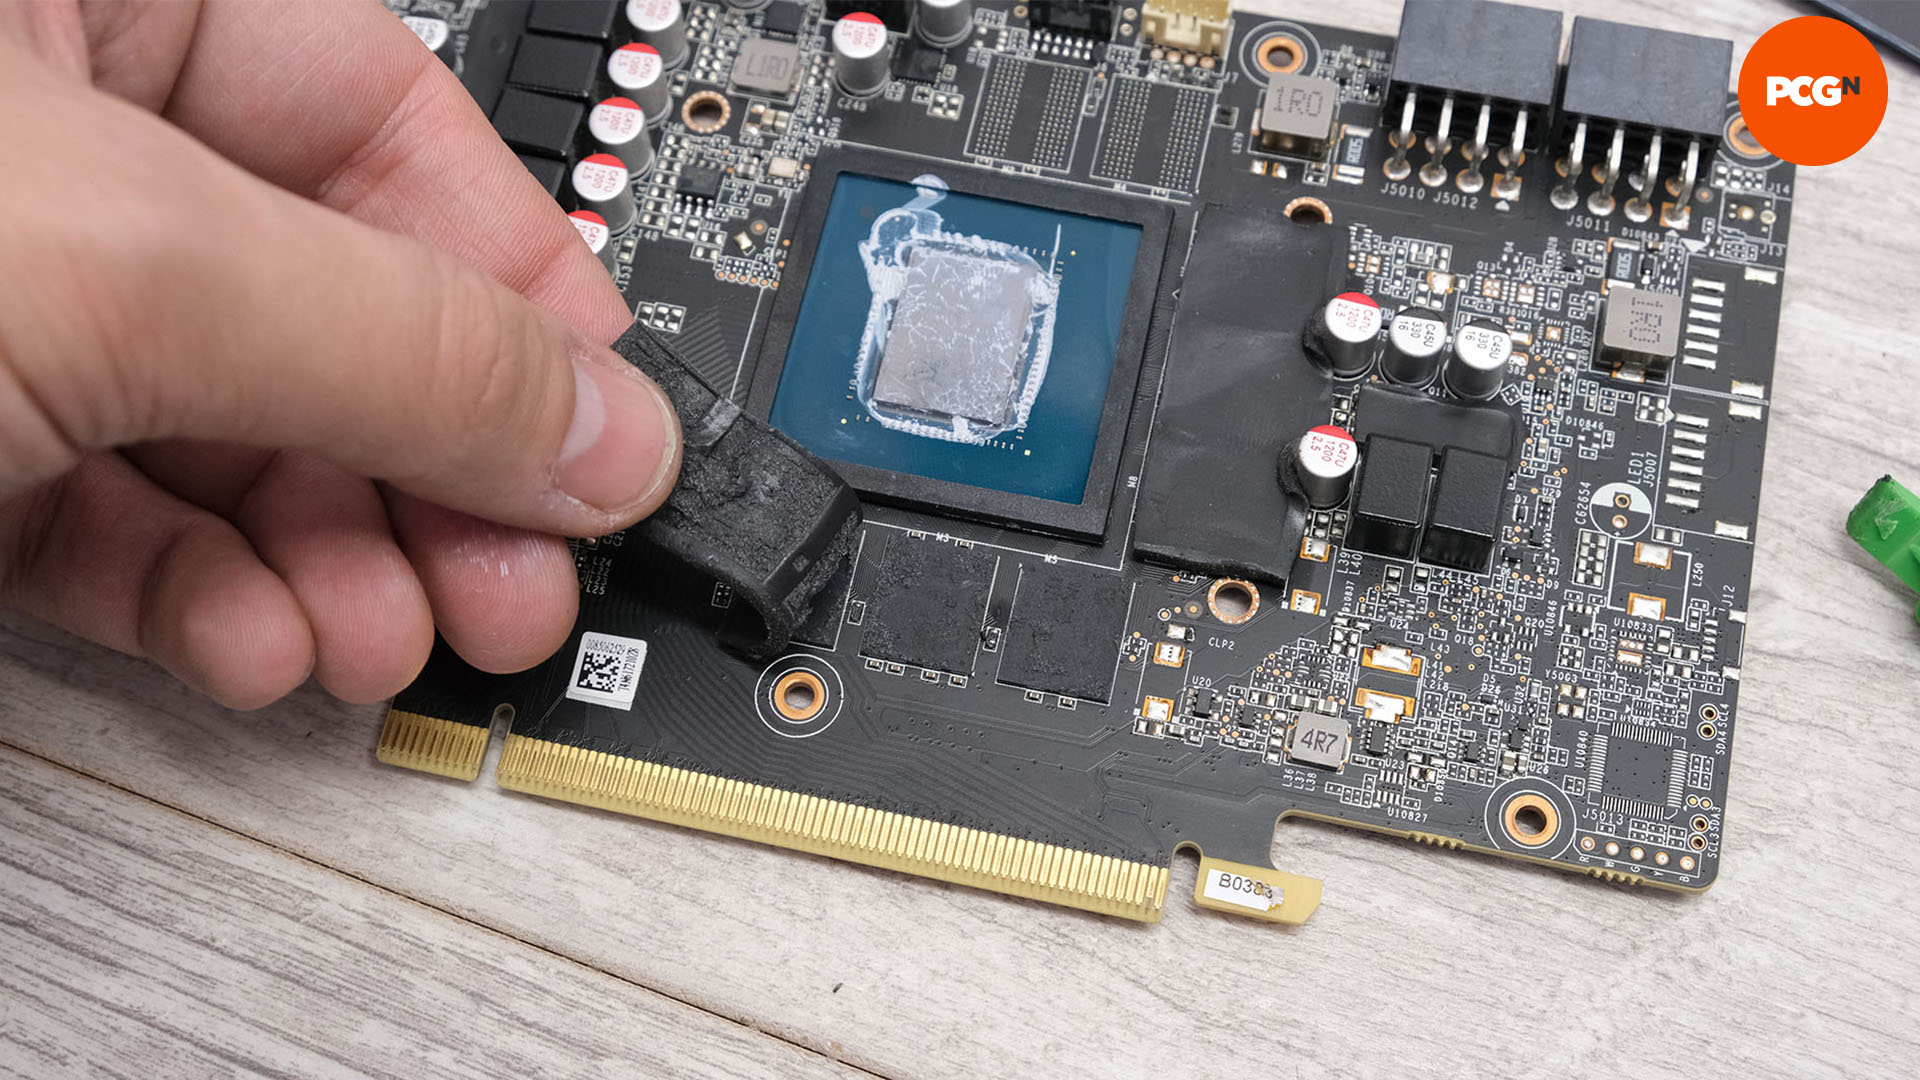 How to lower GPU temp: Remove old thermal pads